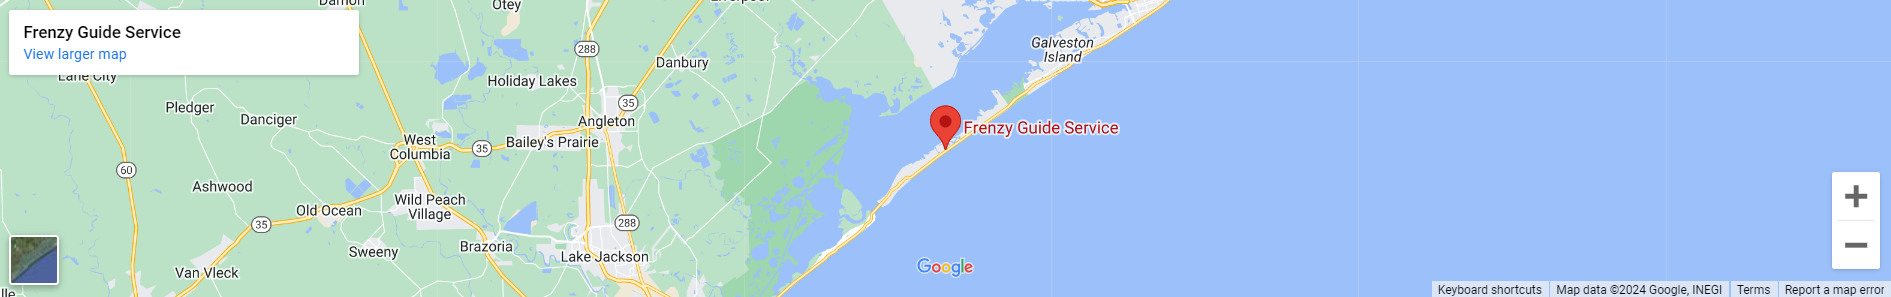 Map location of Frenzy Guide Service pinpointed along the shores near Galveston, Texas, perfect for planning your next fishing trip.